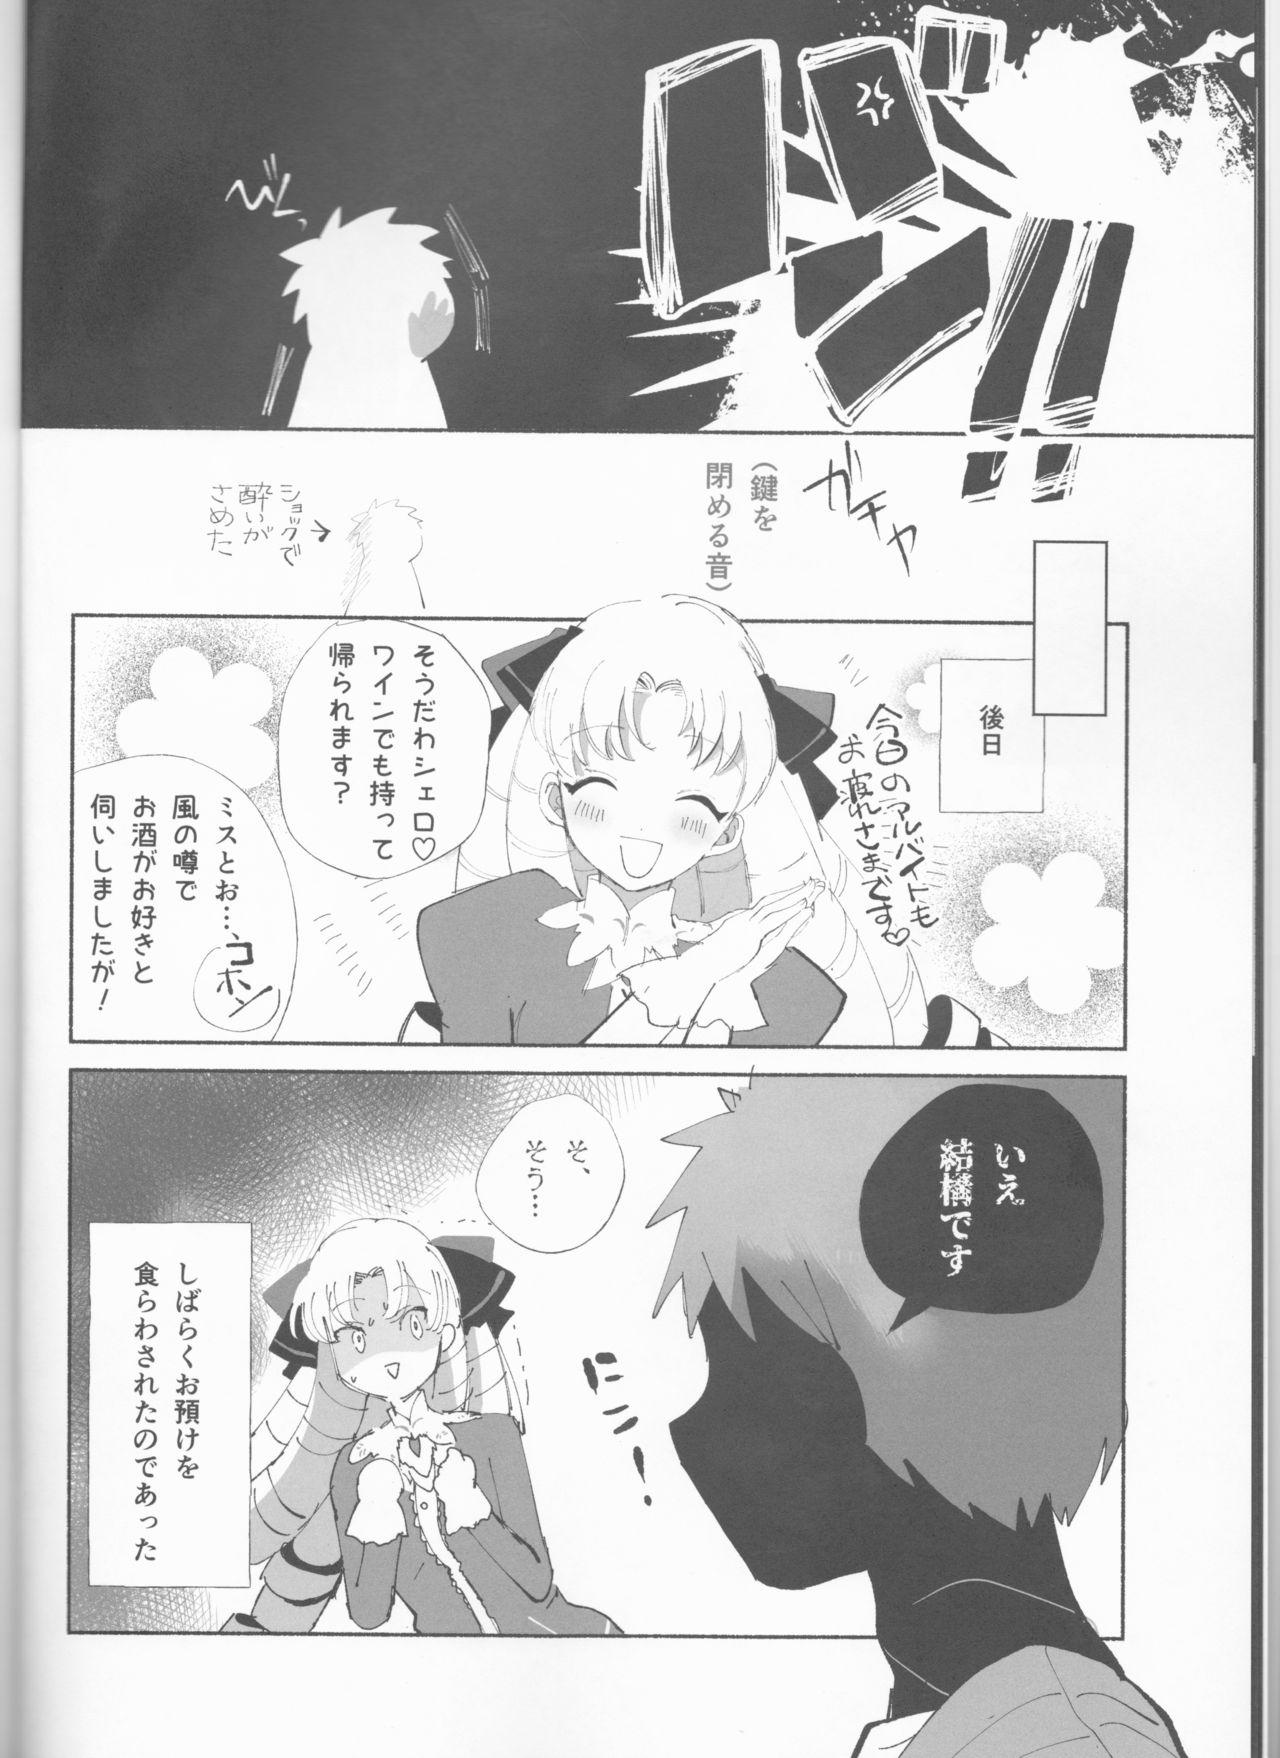 Animated TRAUMEREI(Fate/stay night] - Fate stay night Butt Plug - Page 9